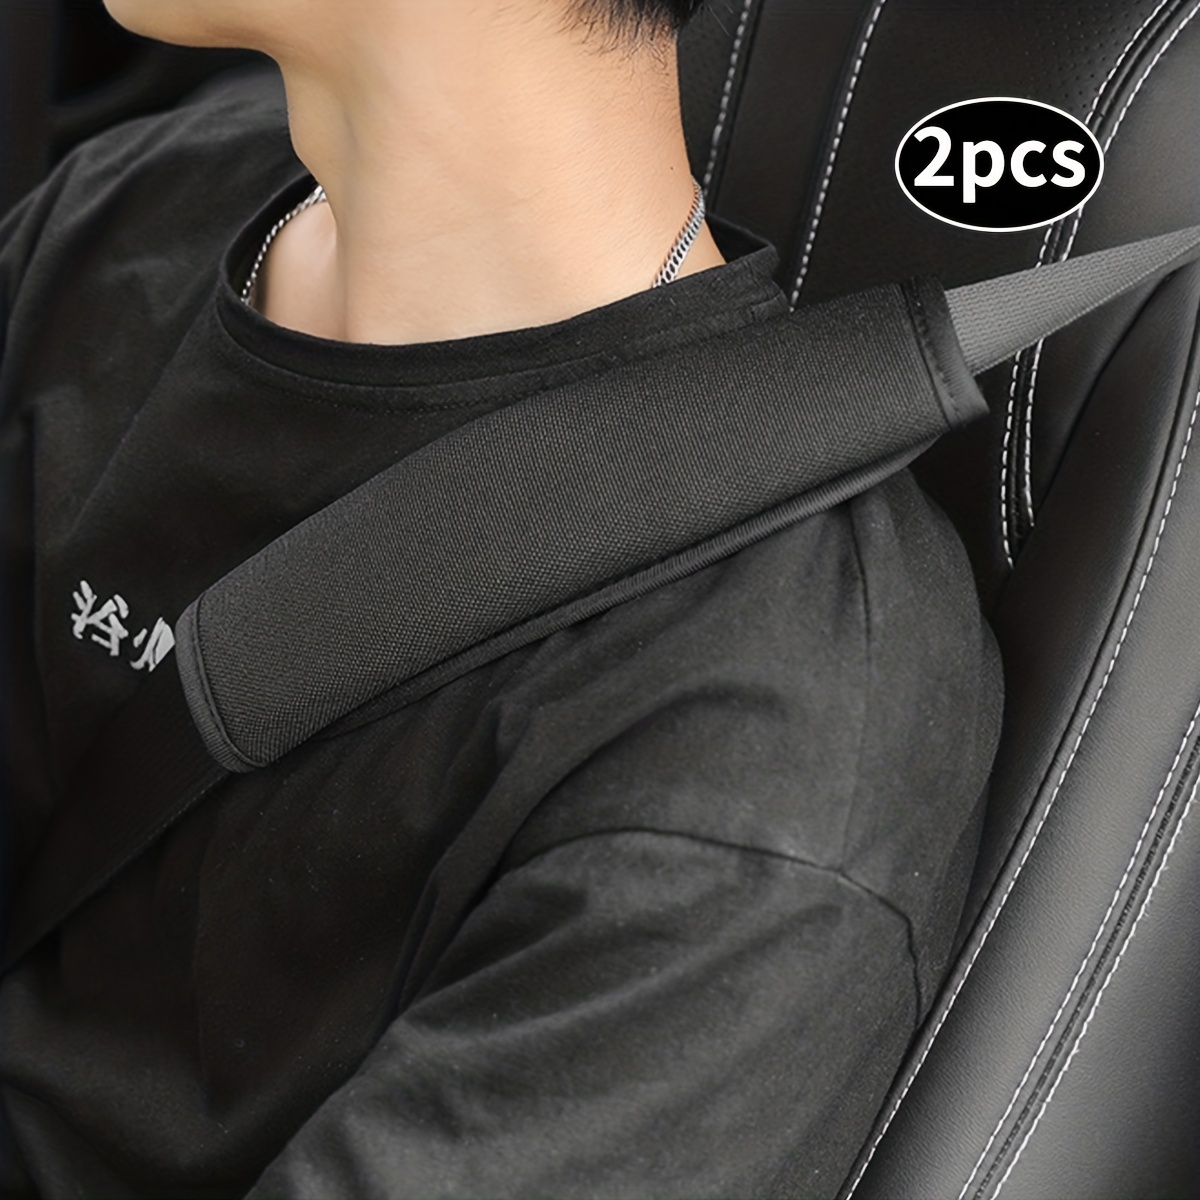 2pcs Car Seat Belt Buckle Protector Sleeve Anti Scratch Cover for